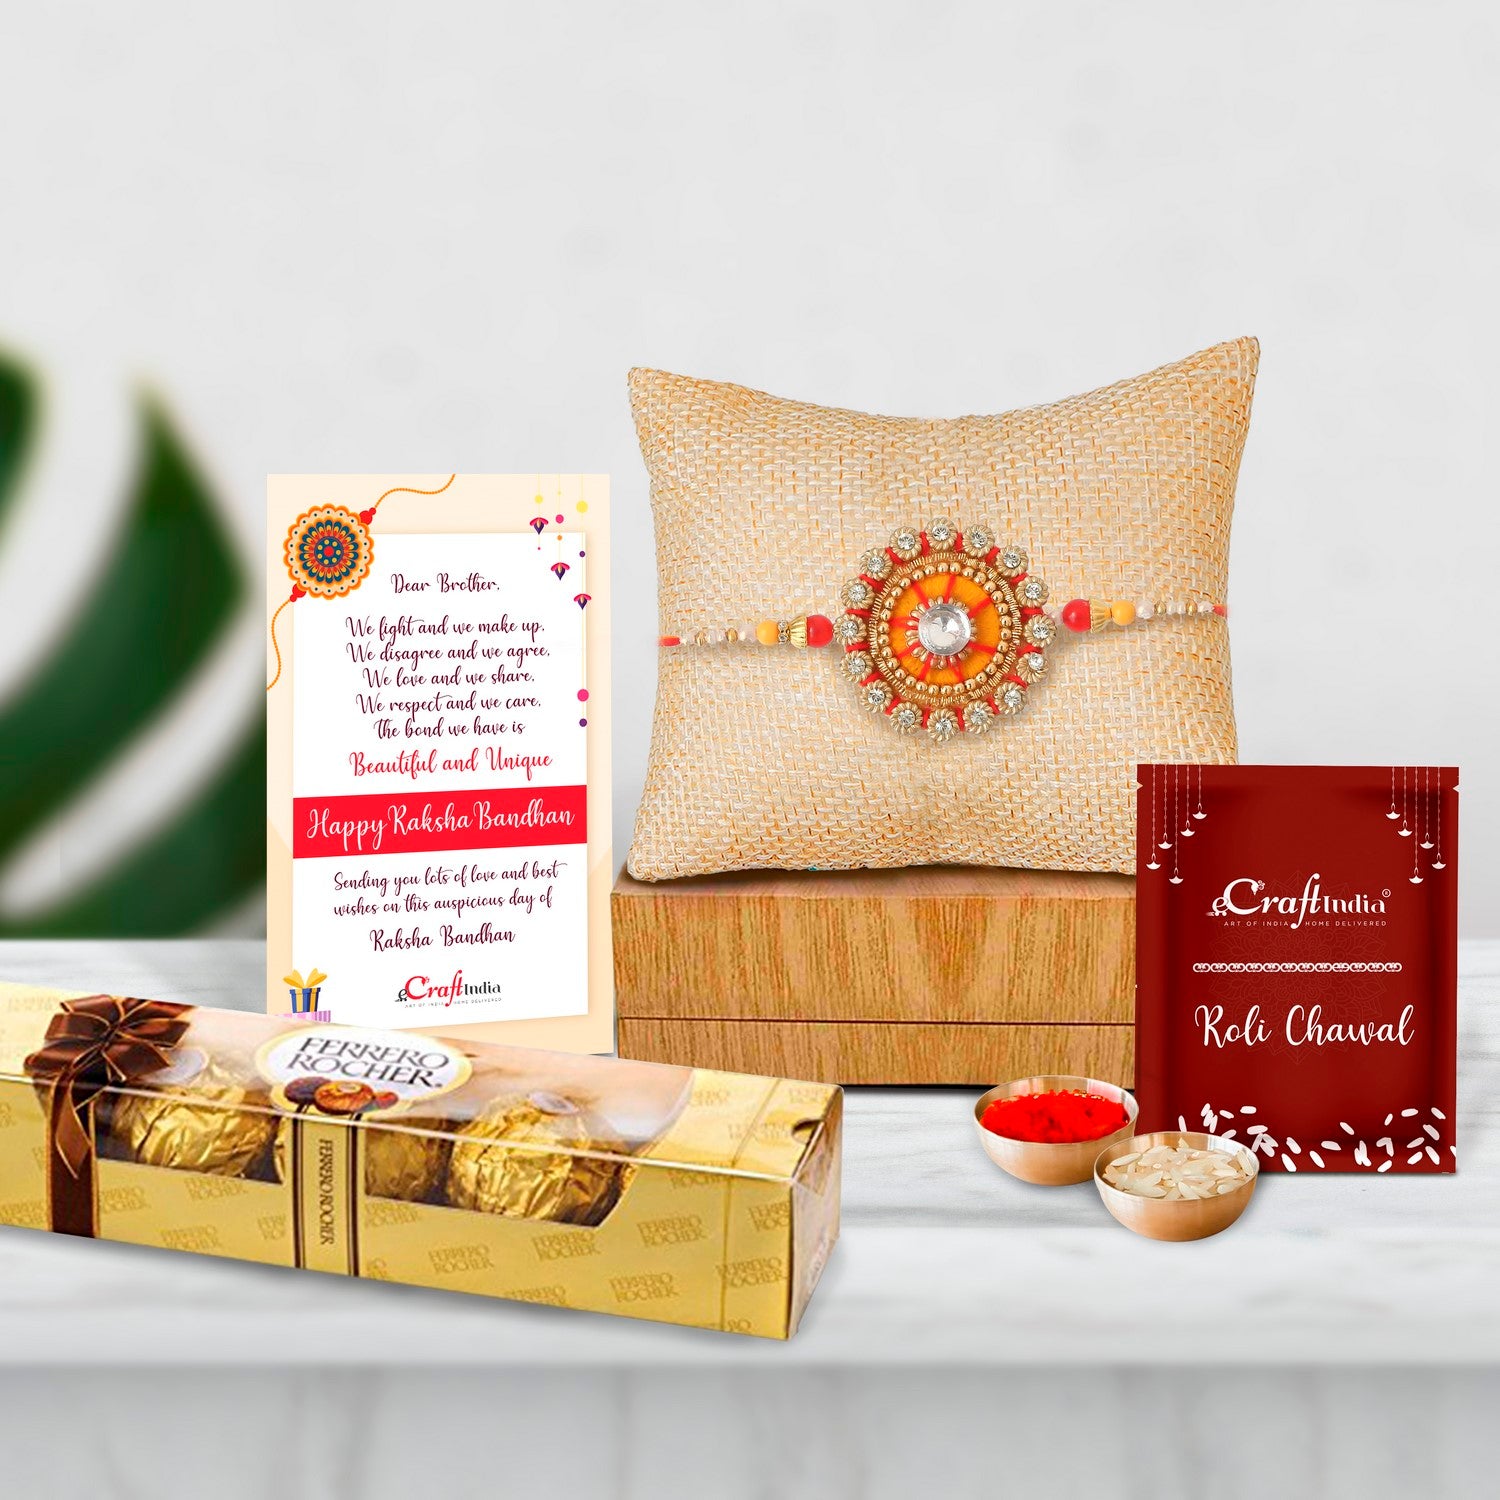 Designer Rakhi with Ferrero Rocher (4 pcs) and Roli Chawal Pack, Best Wishes Greeting Card